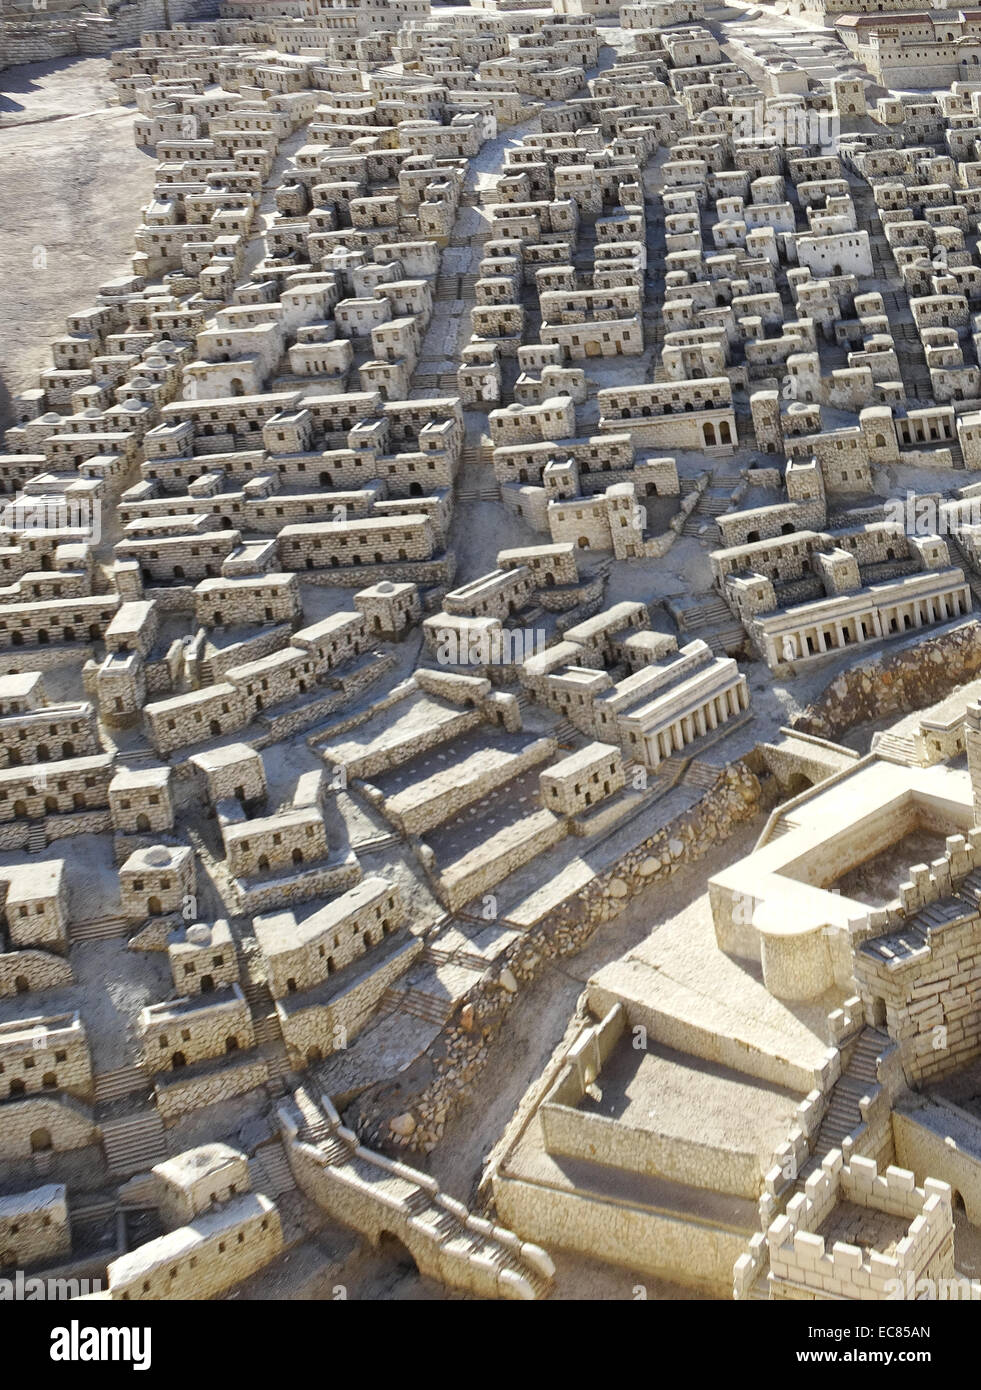 Detailed street view of the Model of Jerusalem at the Israel Museum. The Model is a 1:50 scale-model of the City of Jerusalem in the late Second Temple Period. The model was designed by Israeli historian and geographer Michael Avi Yonah based on the writings of Flavius Josephus and other historical sources. The model includes a replica of the Herodian Temple. Stock Photo